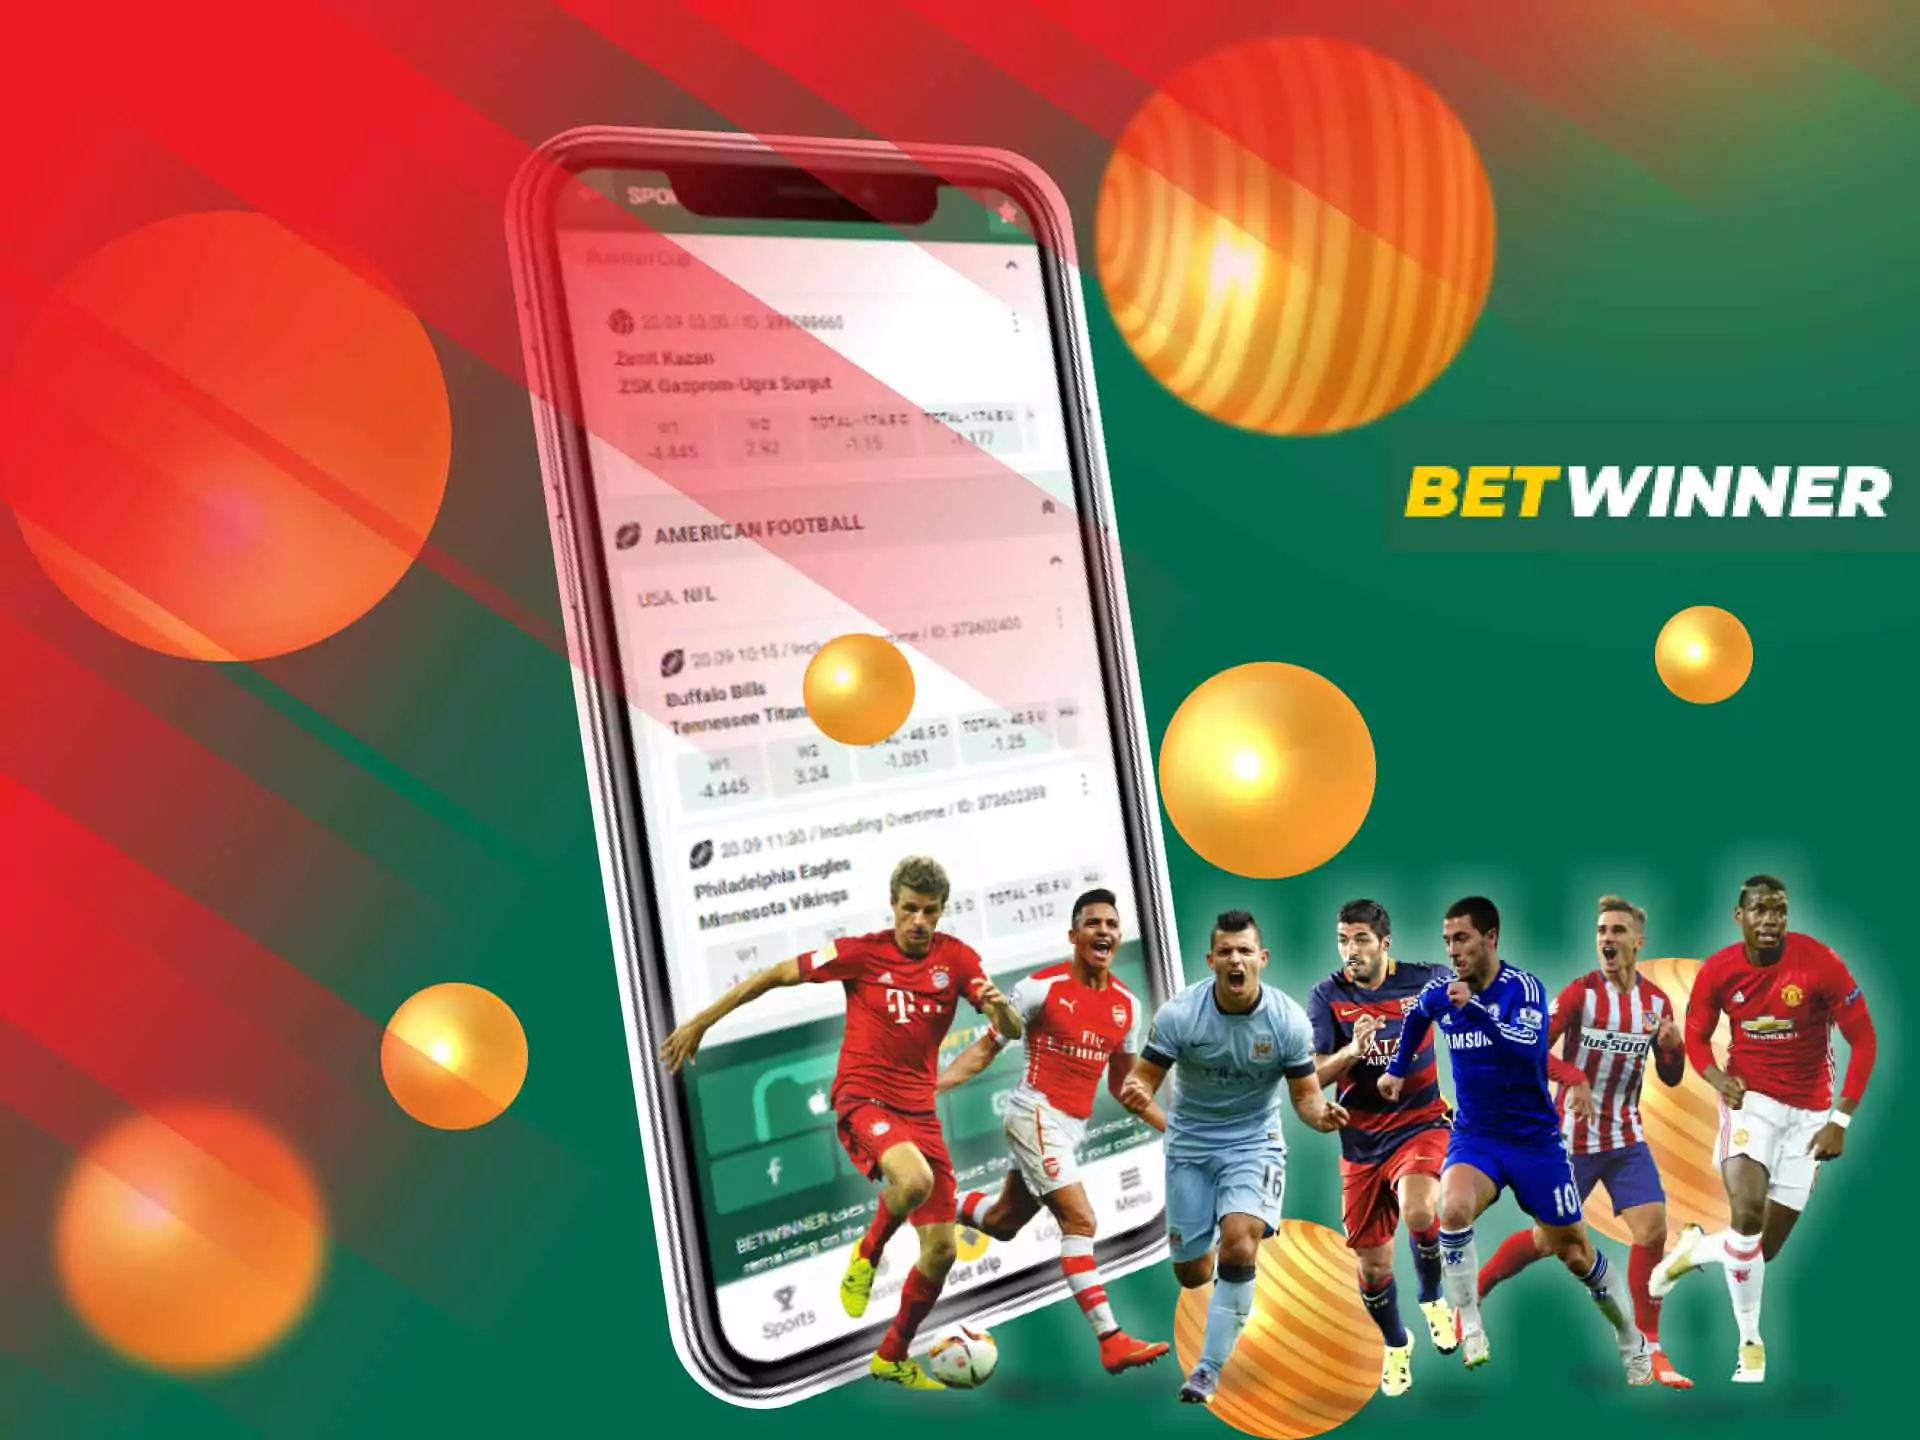 Accumulator bets are great for bigger wins at Betwinner.